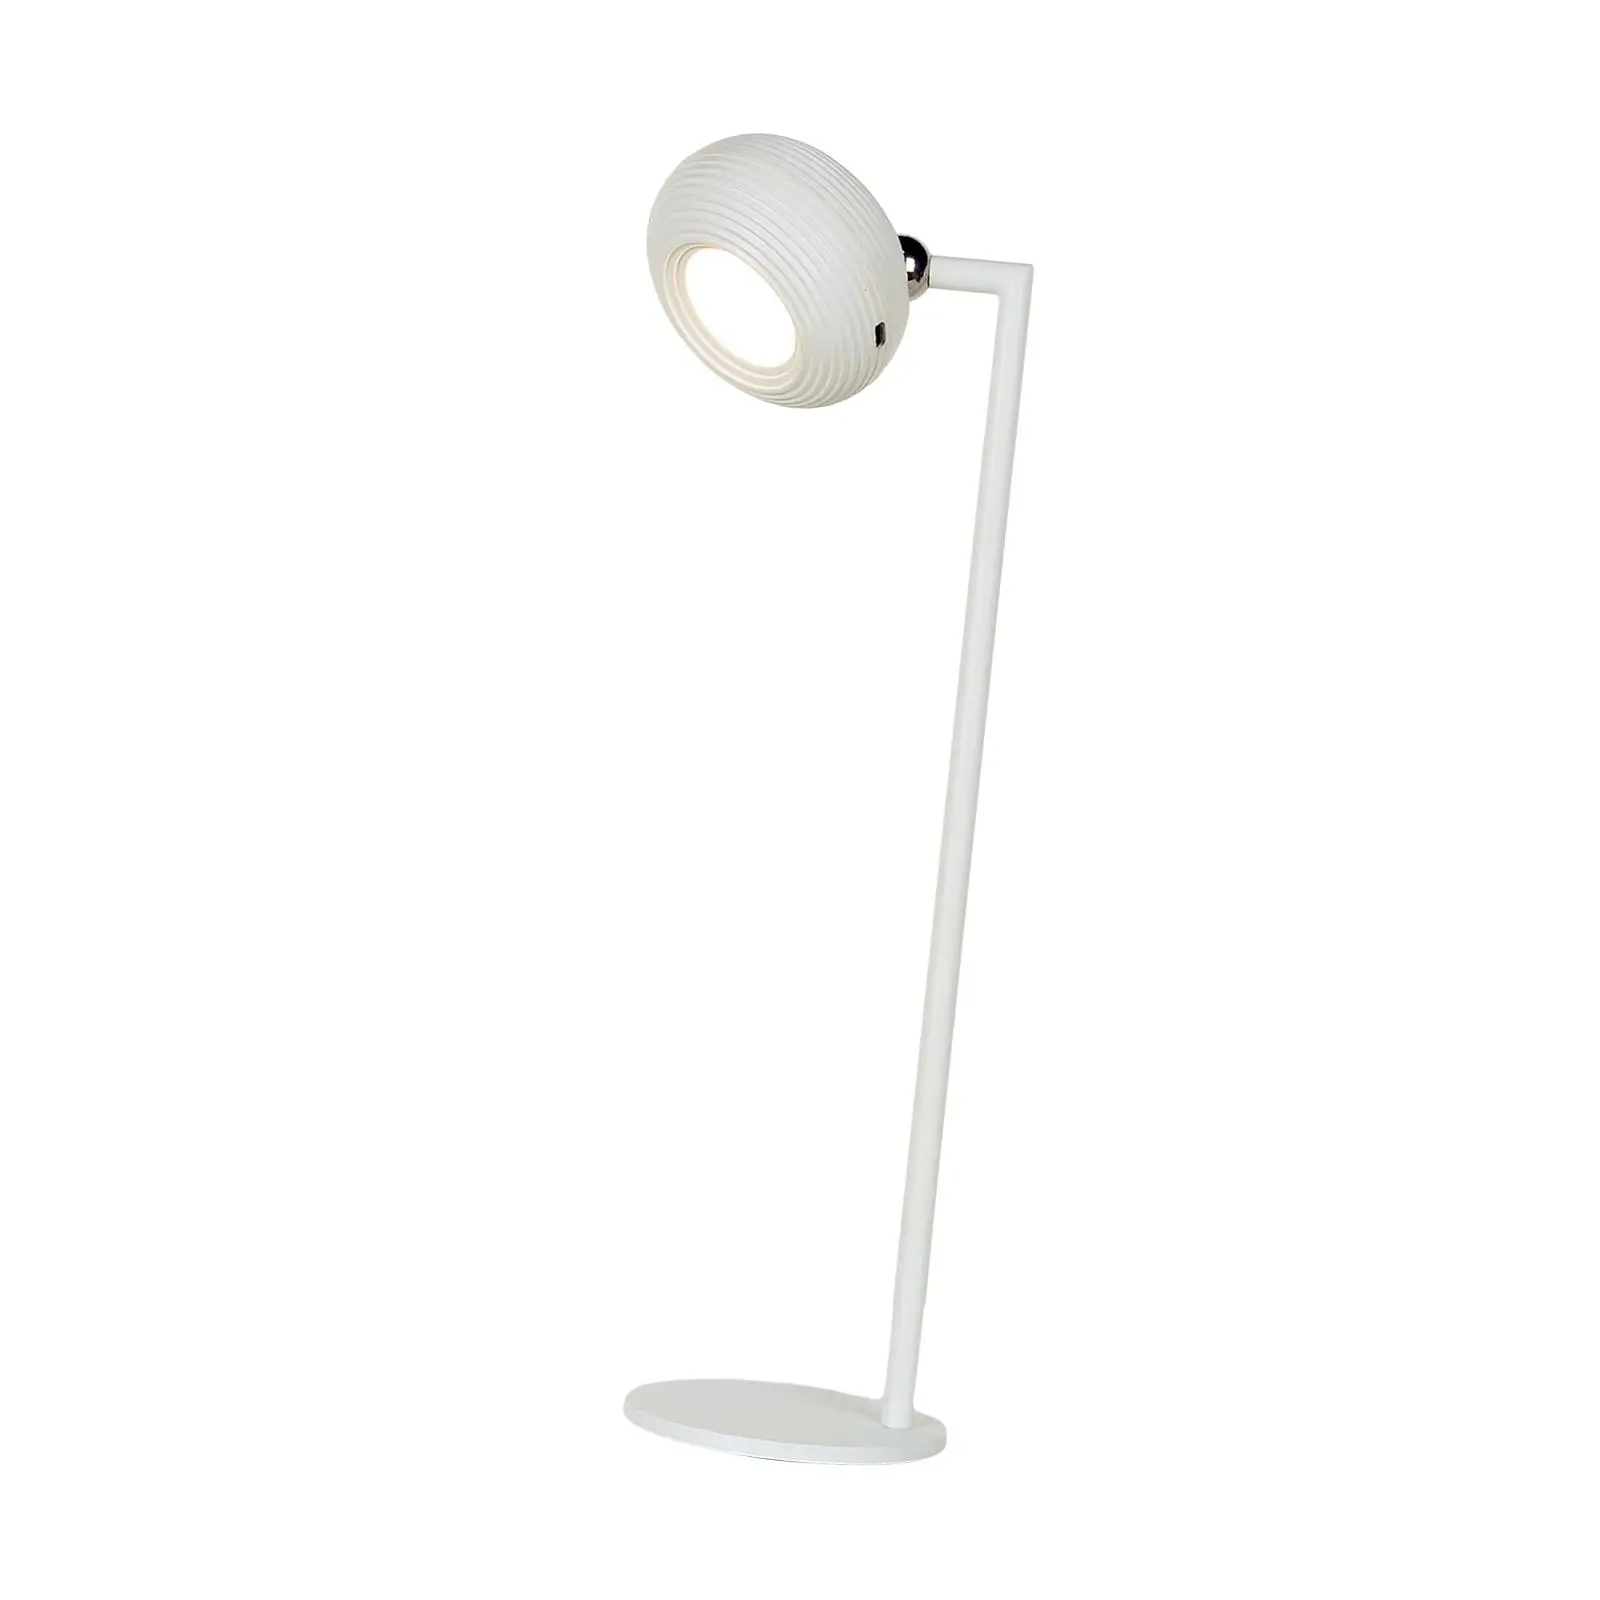 2 in 1 Desk Lamp 3 Levels of Brightness Office Lamp for Reading Home Office